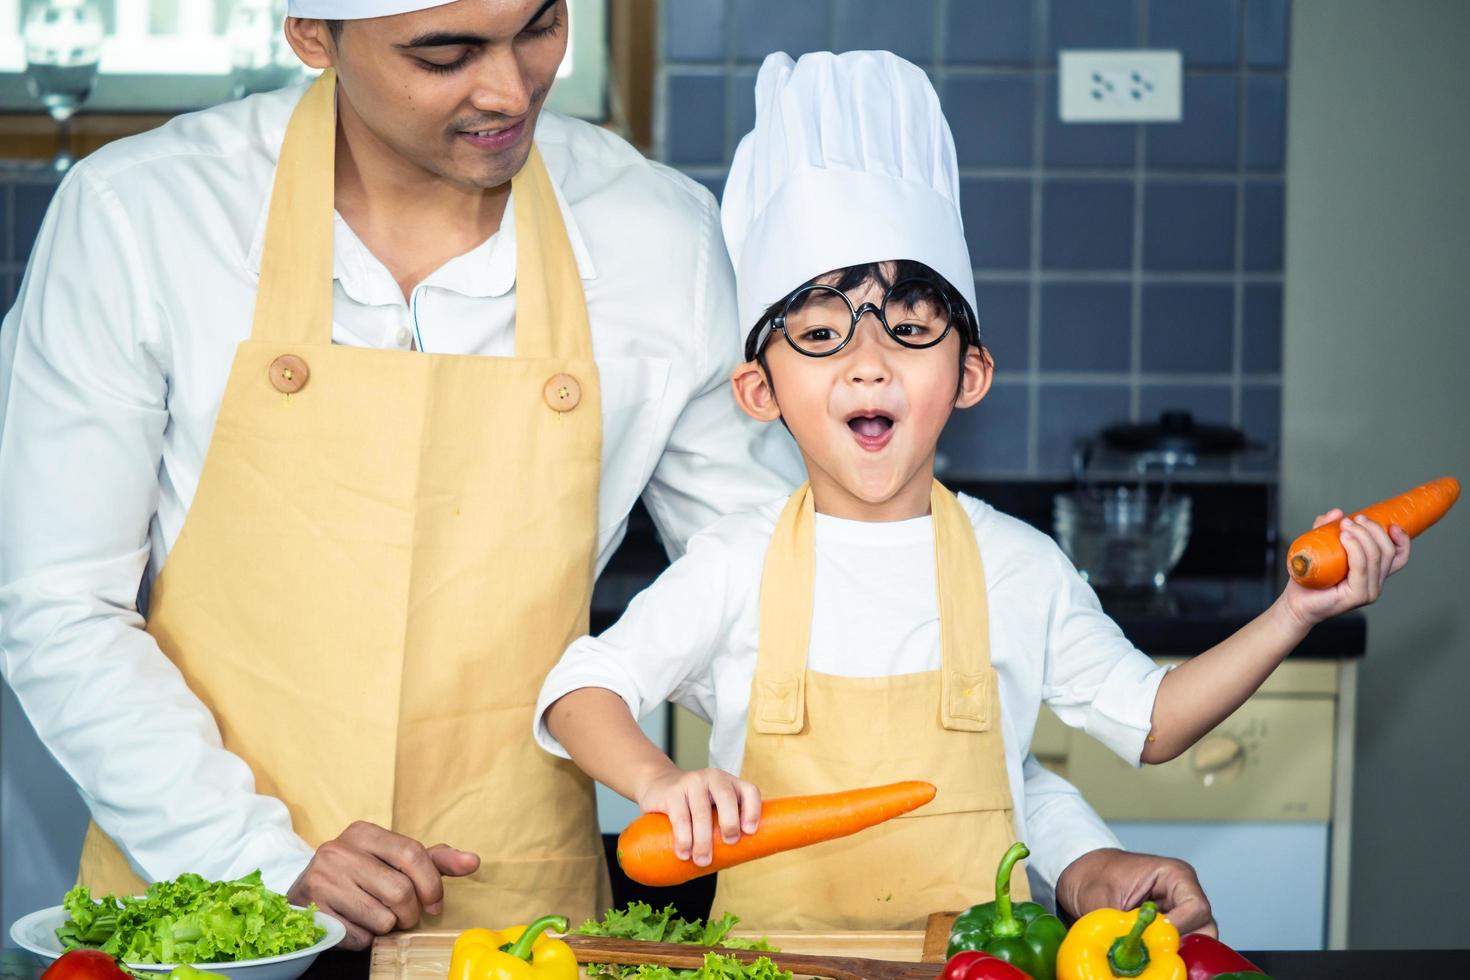 Asian woman young mother with son boy cooking salad photo